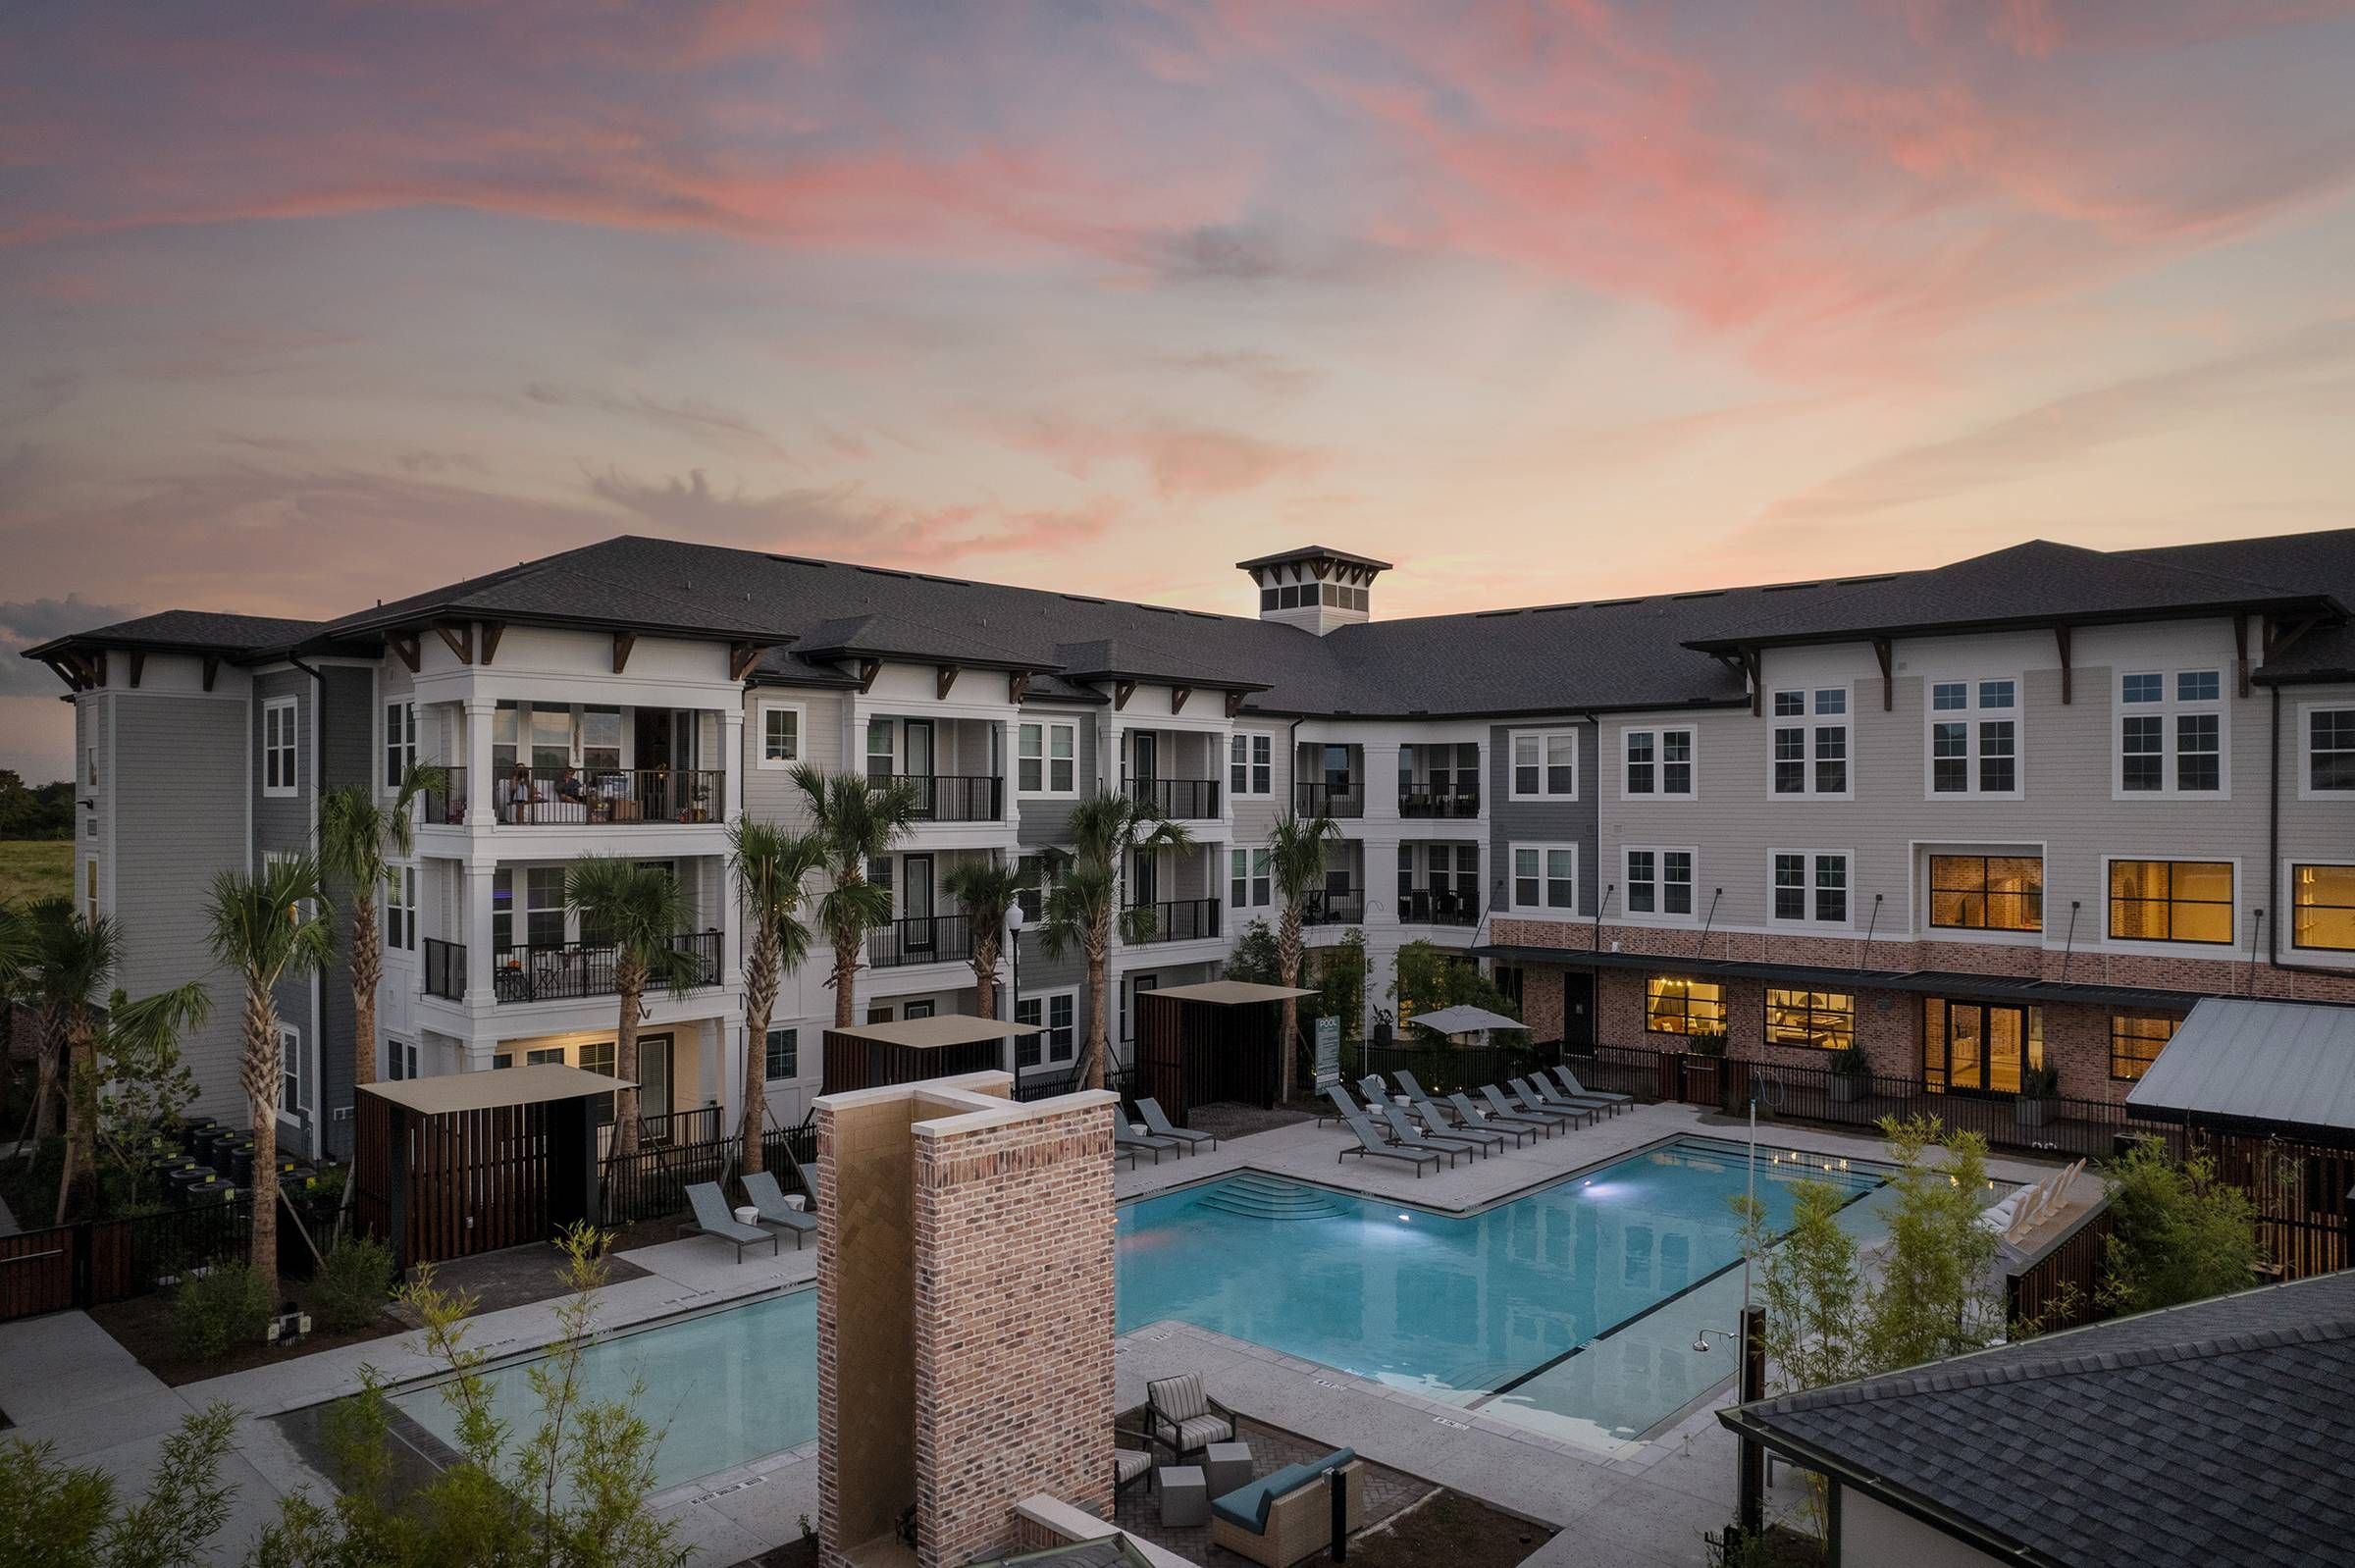 The lit pool and patio area of Alta Winter Garden offer a peaceful evening ambiance in an aerial view at dusk.